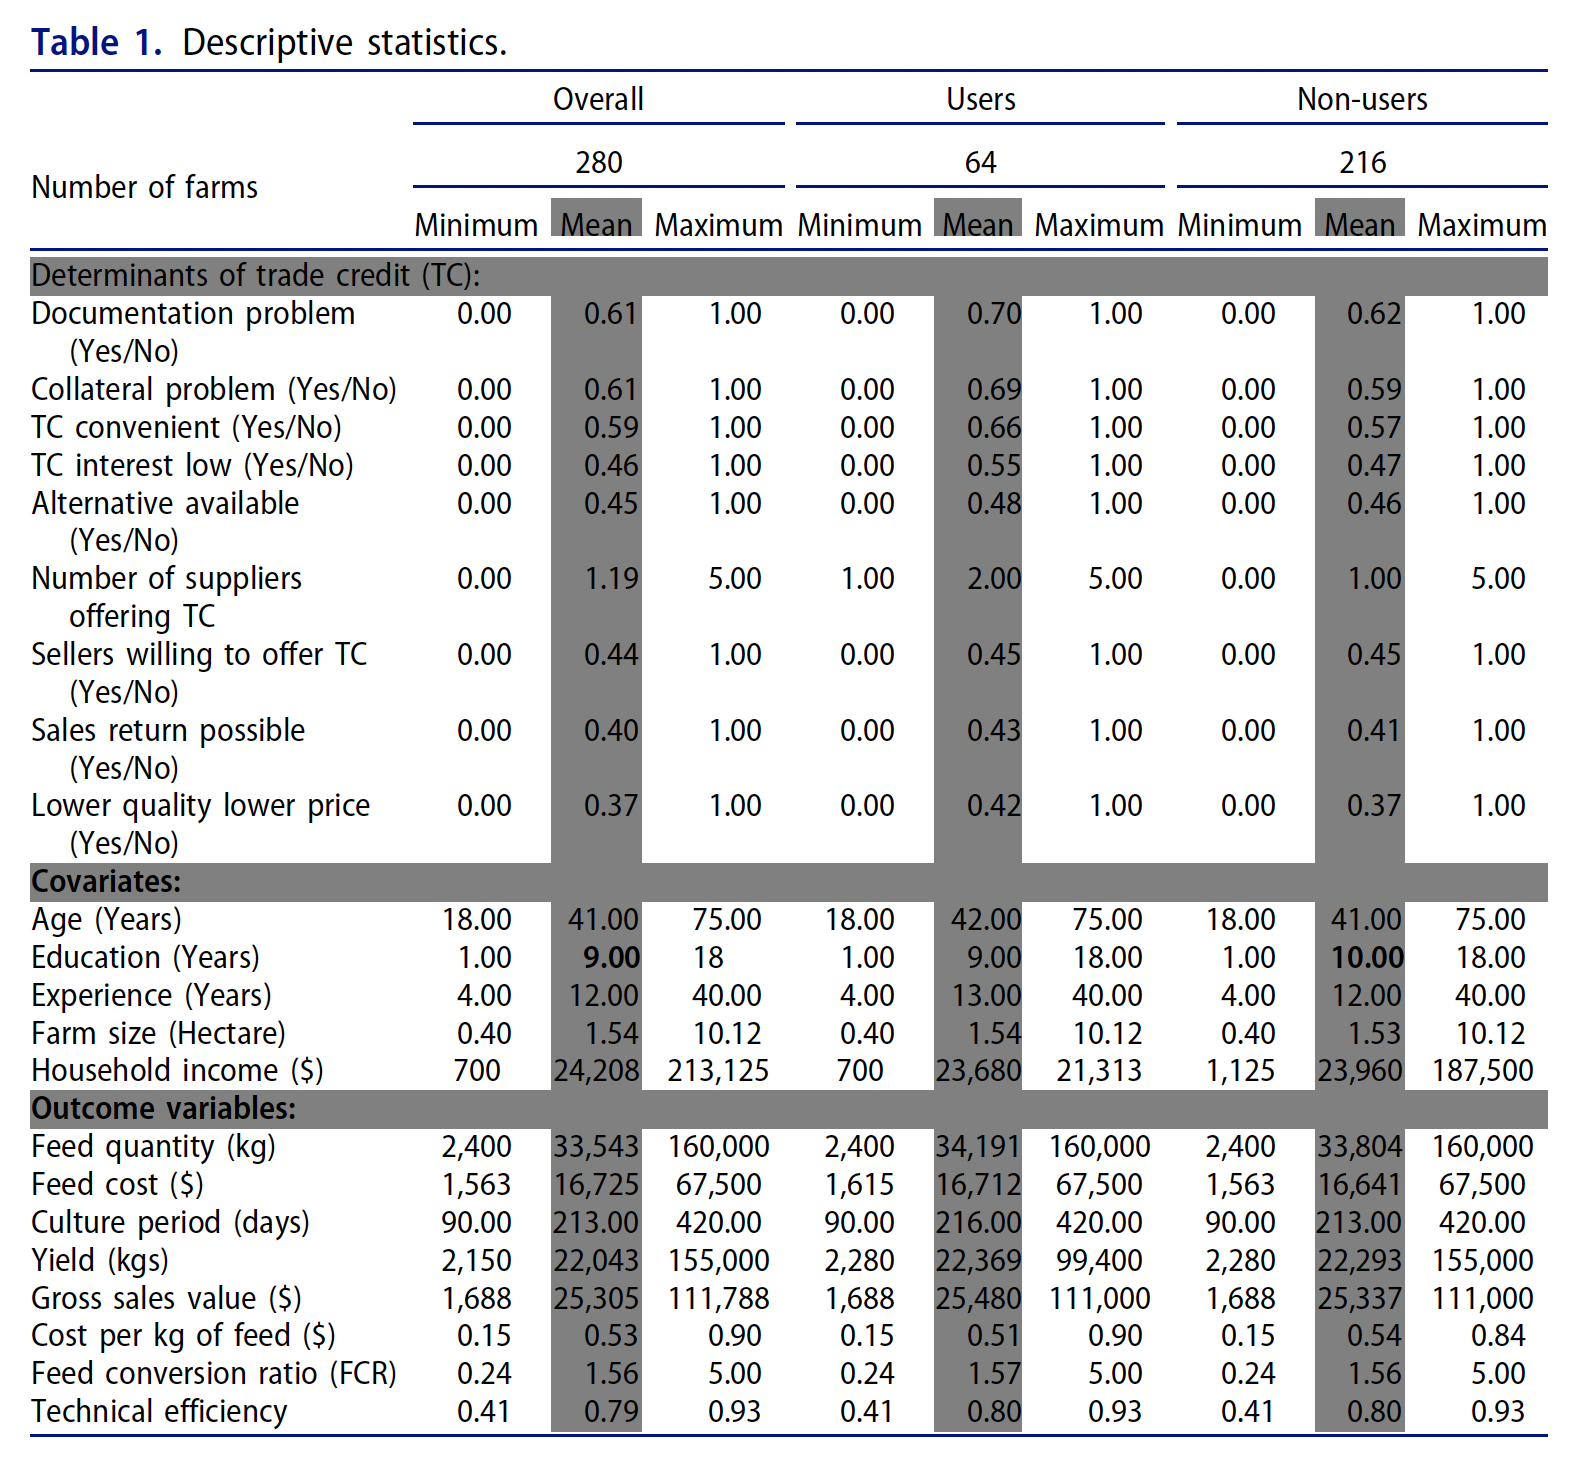 Table 1 provides descriptive statistics of the variables used in this study.